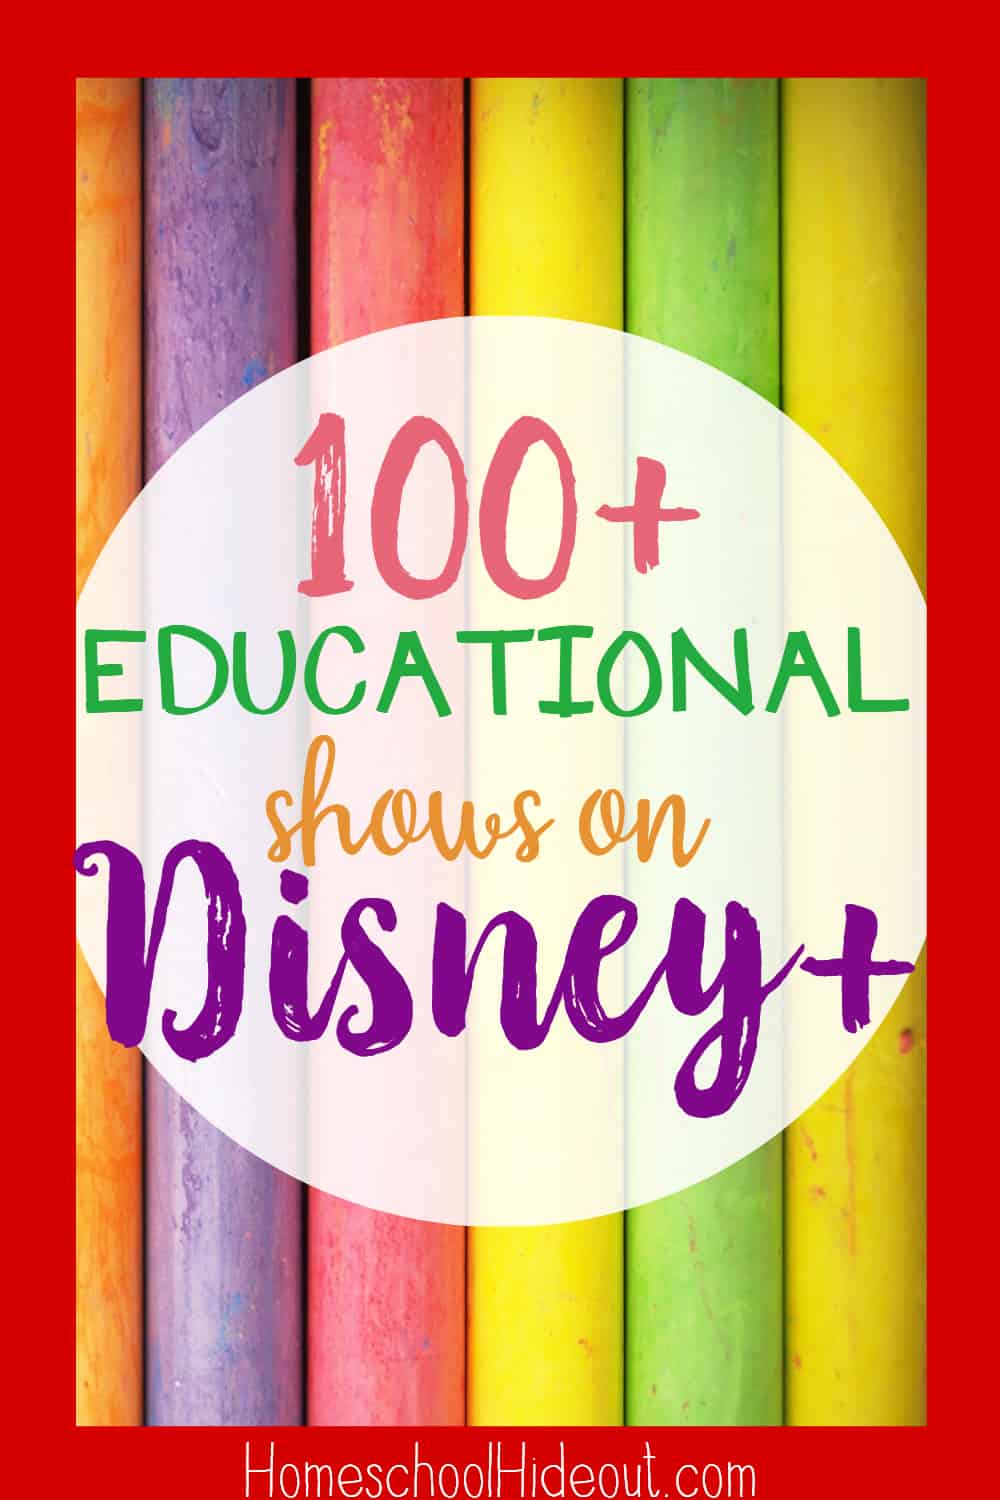 If you're looking for educational shows on Disney+, you can't miss this list! Perfect for all ages! #learningathome #teachershelpingteachers #covd19 #homeschool #onlinelearning